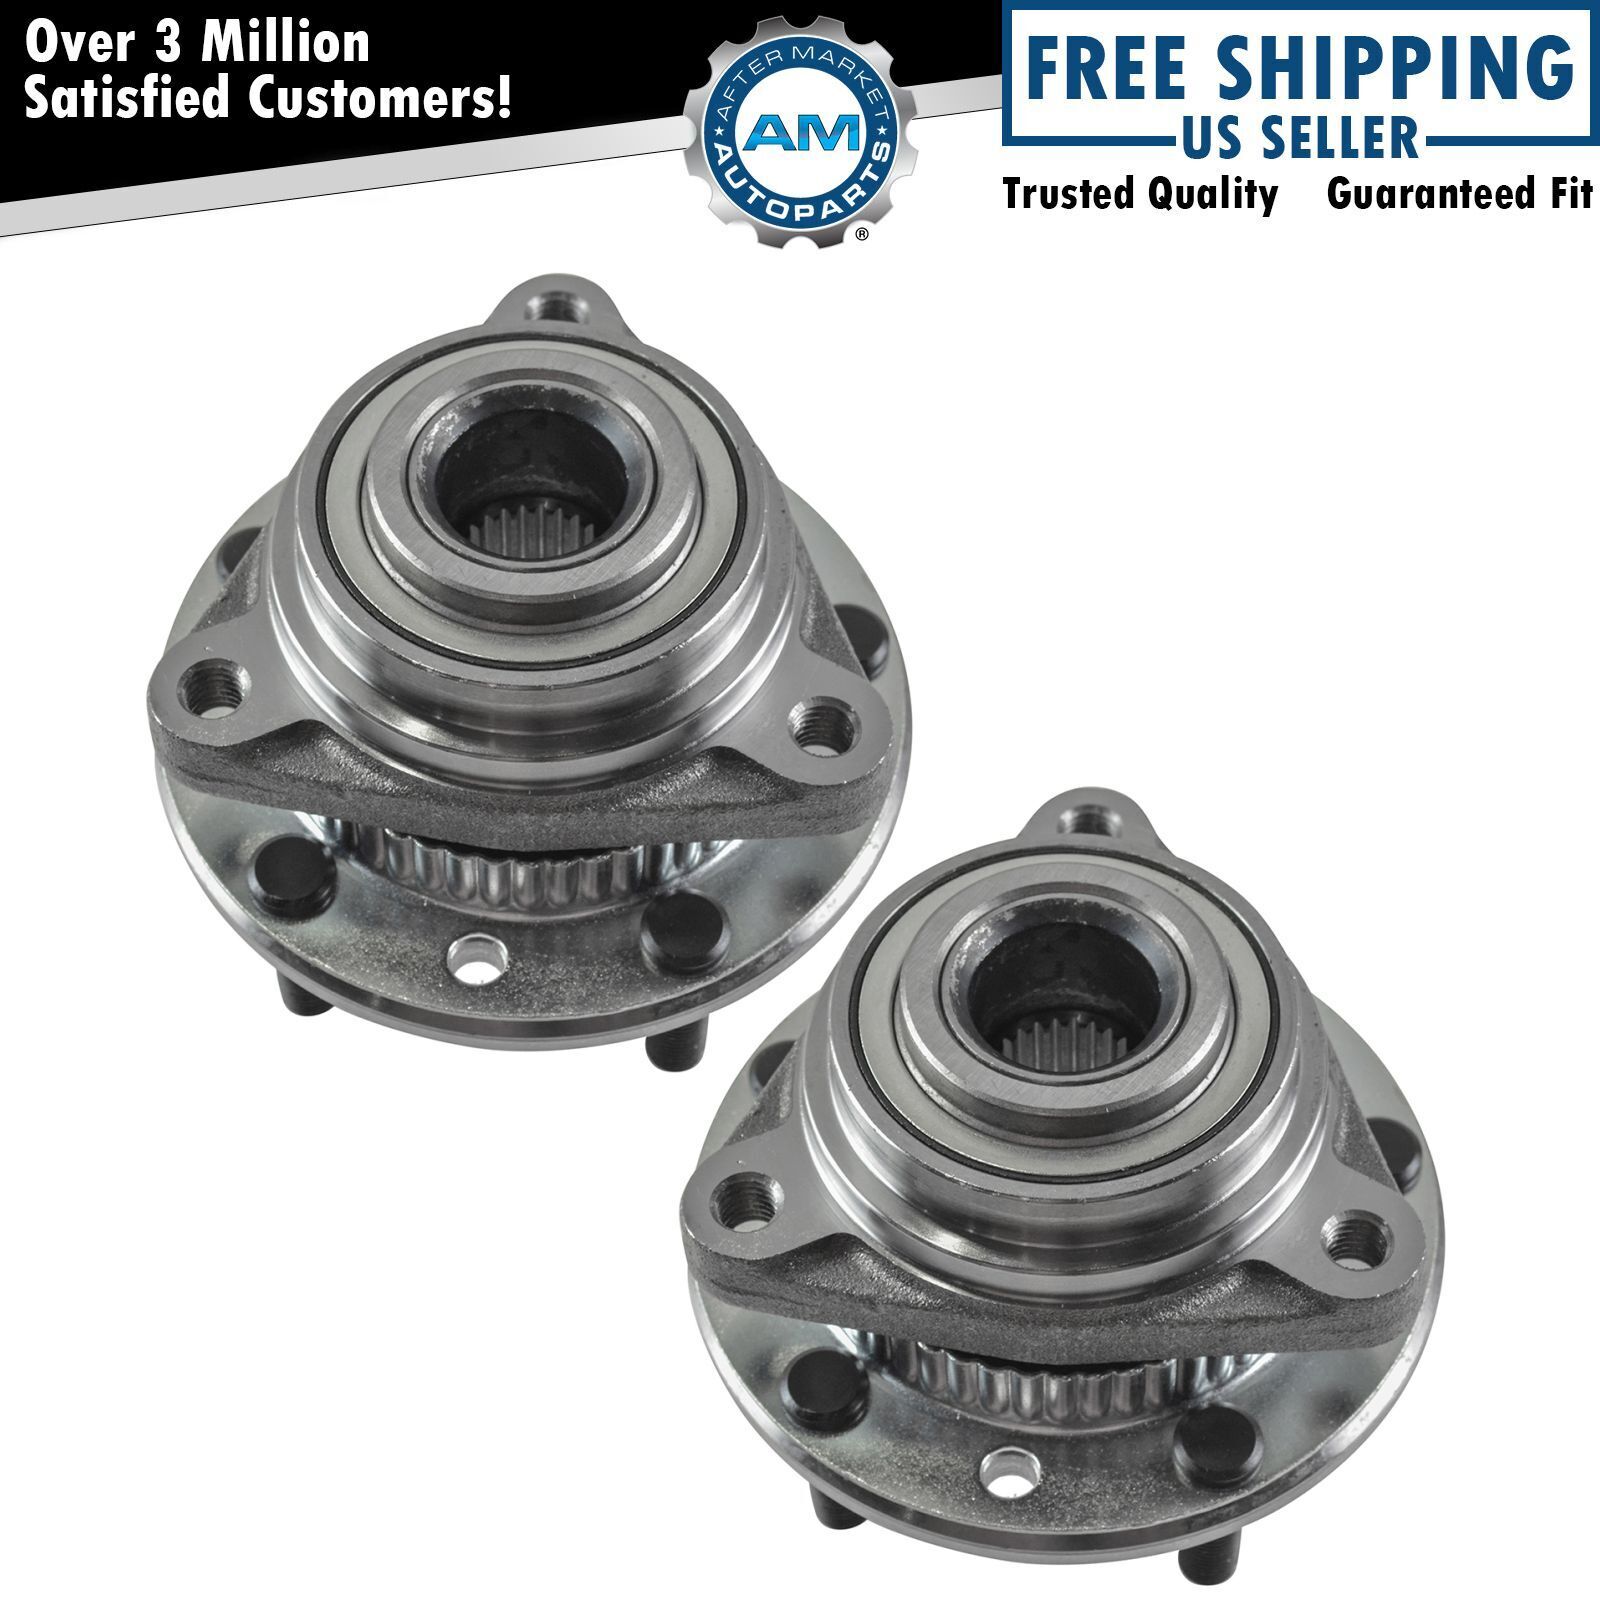 Front Wheel Hubs & Bearings Pair Set of 2 NEW for Chevy GMC Olds 4WD 4x4